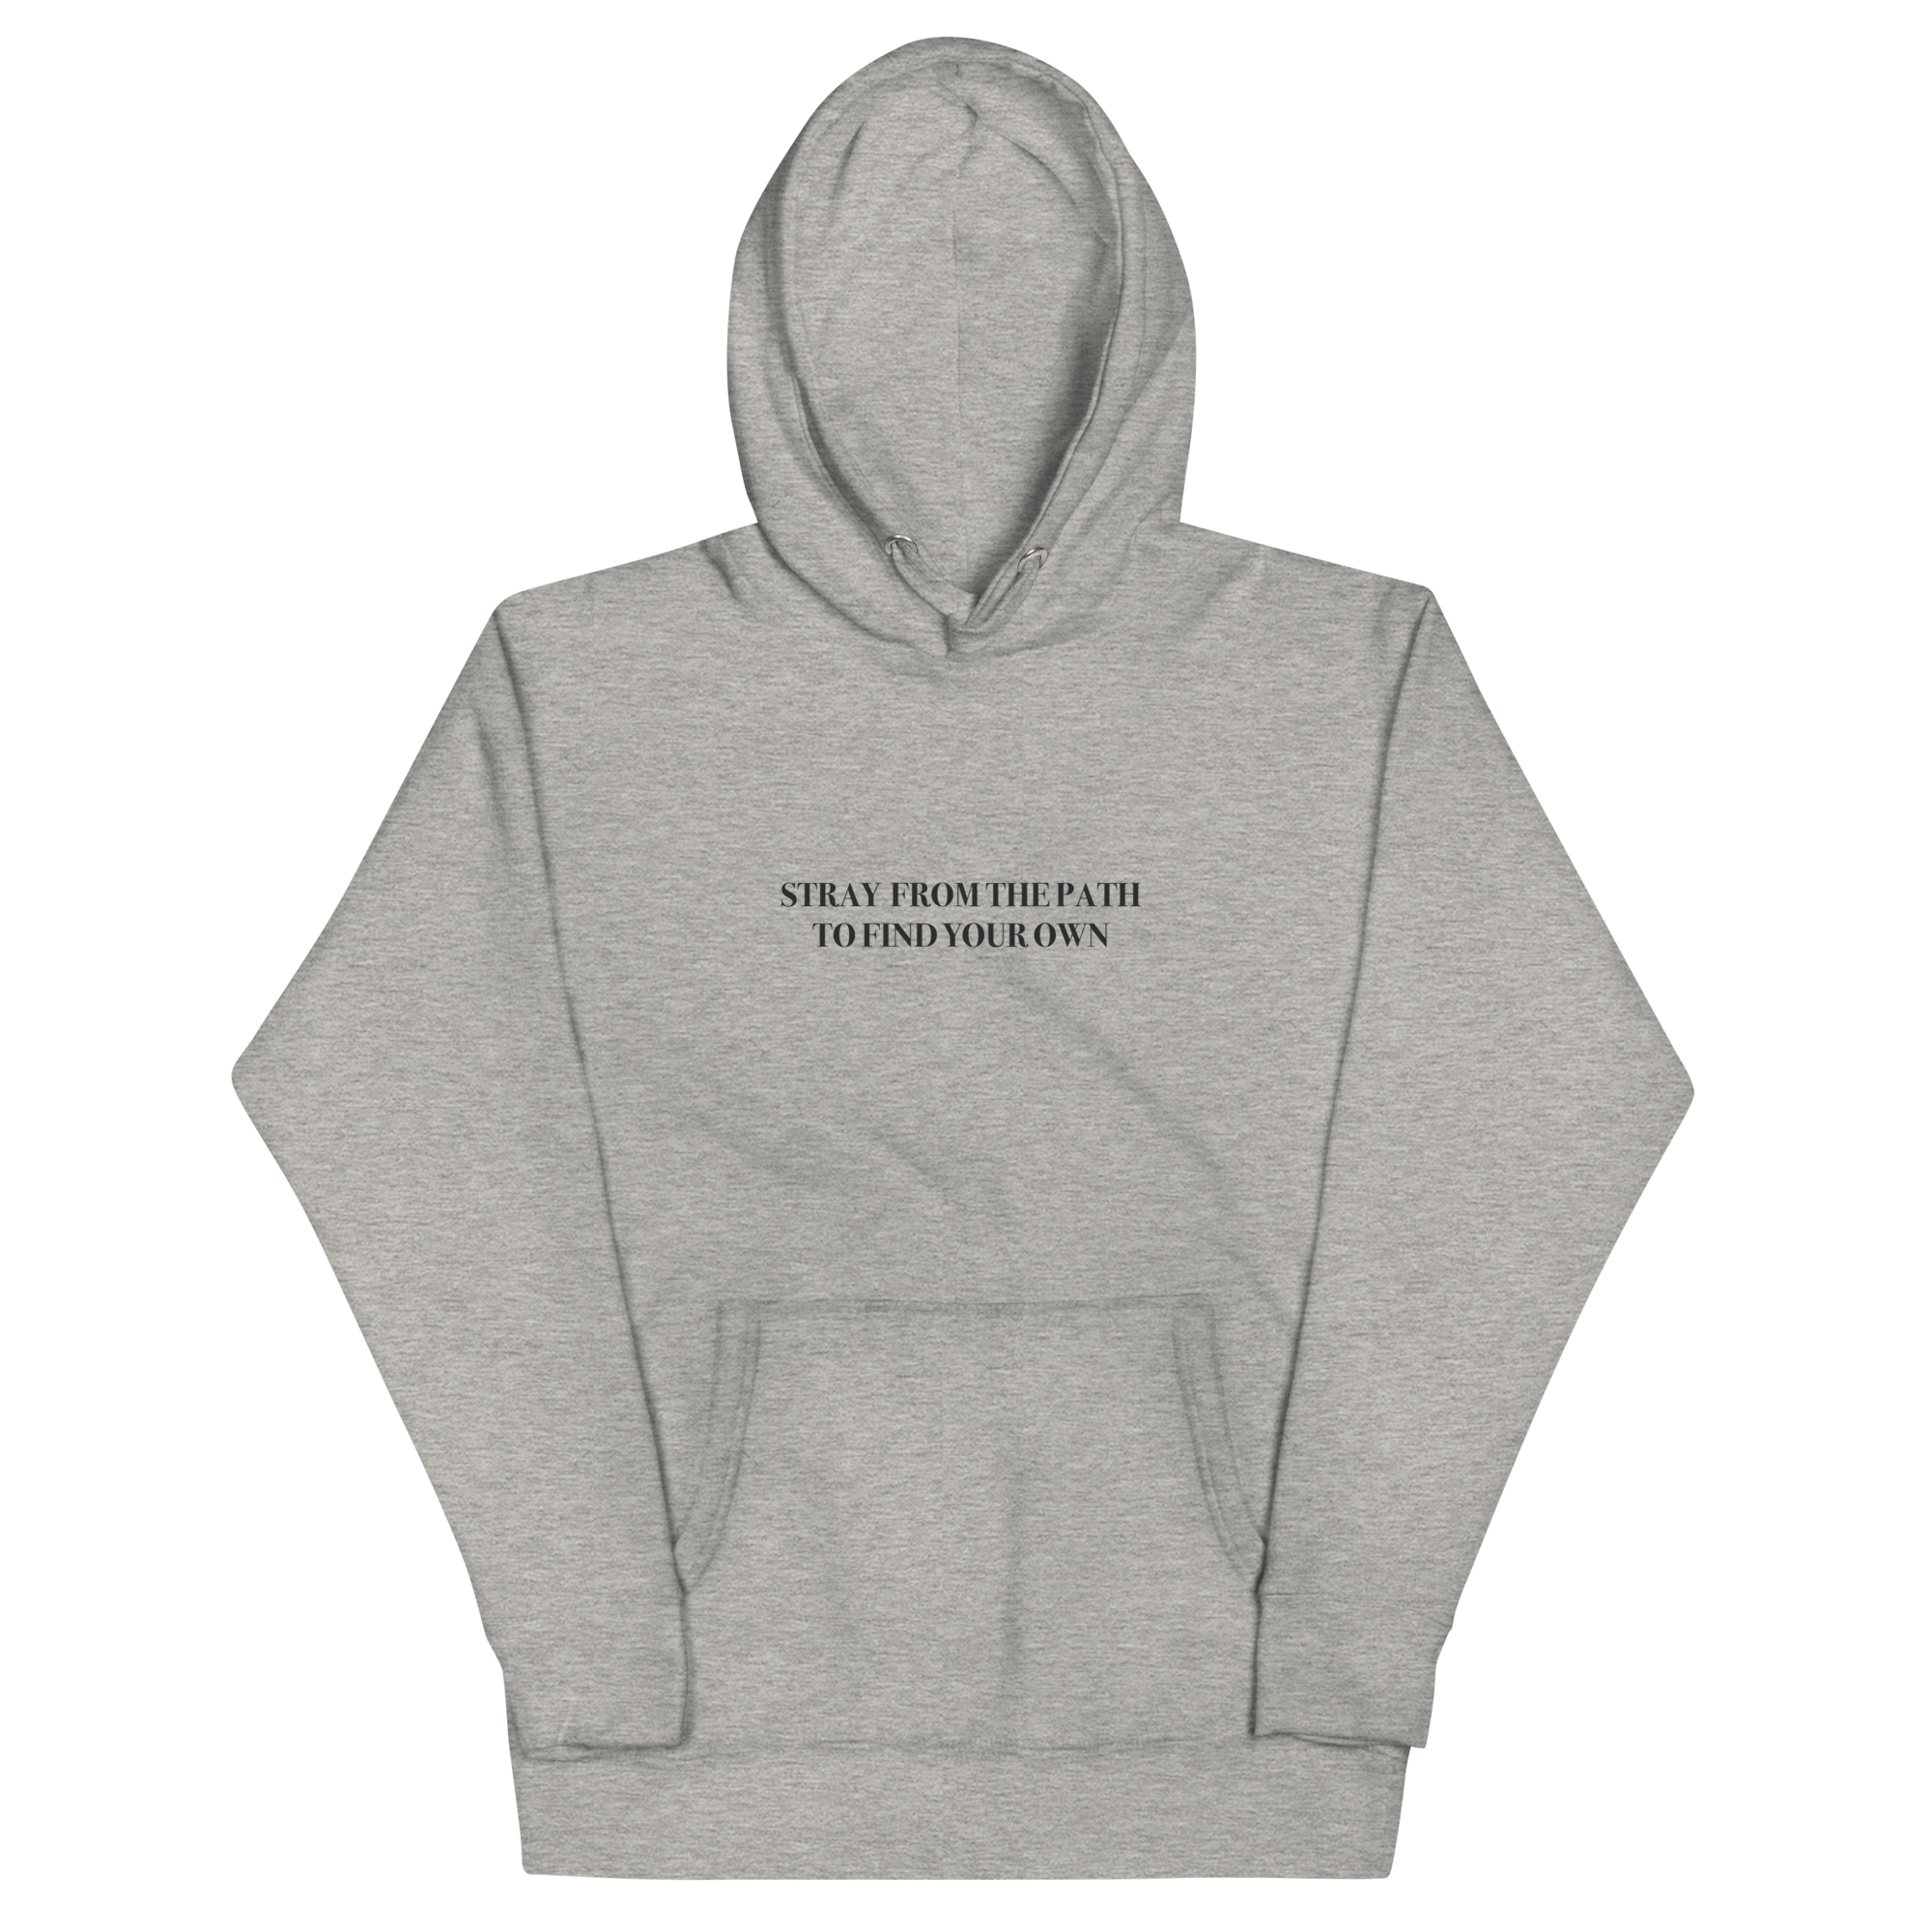 Emma Norton: Big Bad grey hoodie with  a quote on the front